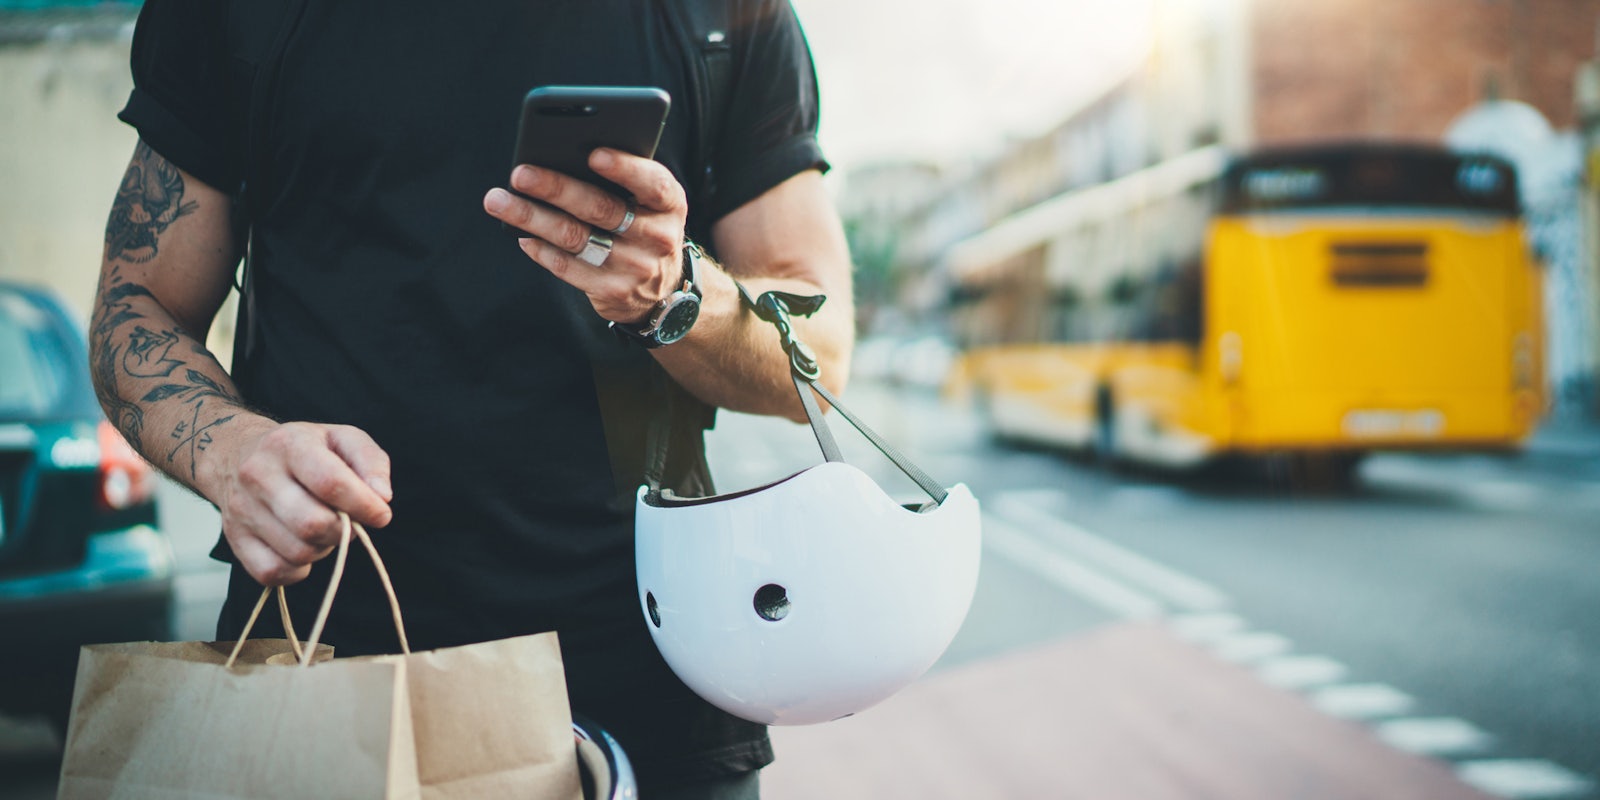 A man using a delivery or rideshare app. He is holding a bag and a helment.